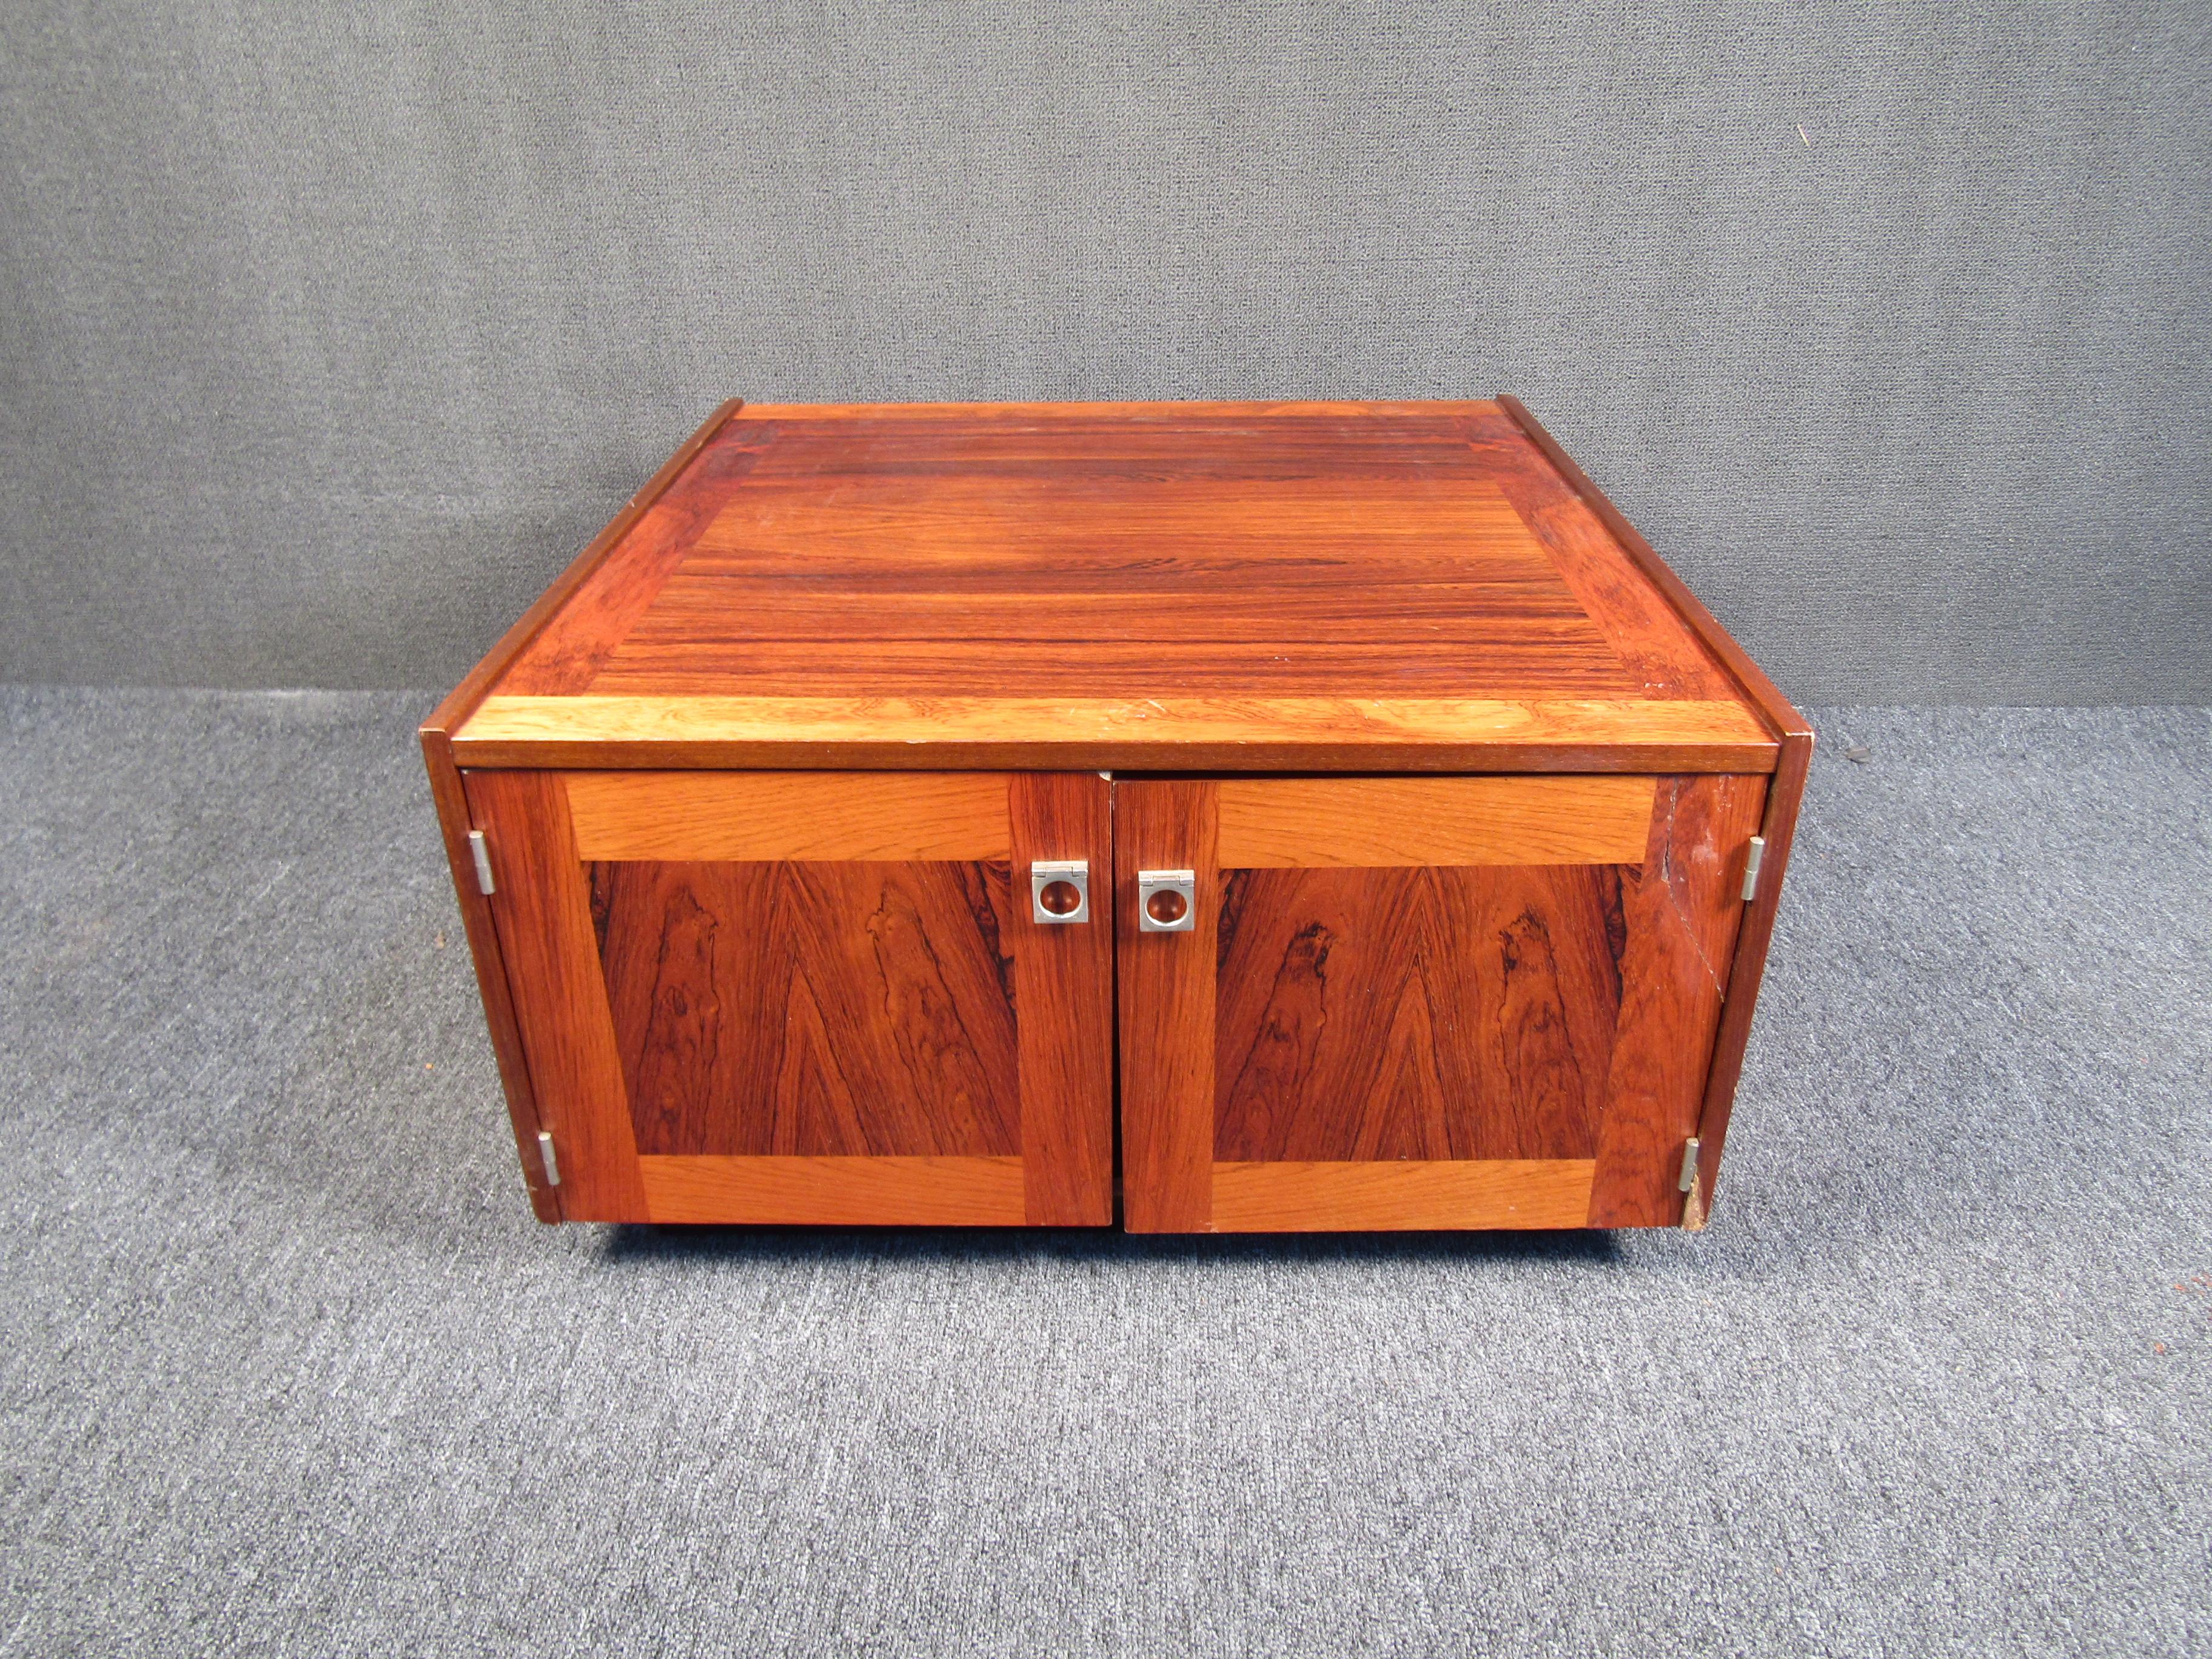 Charming Midcentury Rosewood Coffee Table In Fair Condition For Sale In Brooklyn, NY